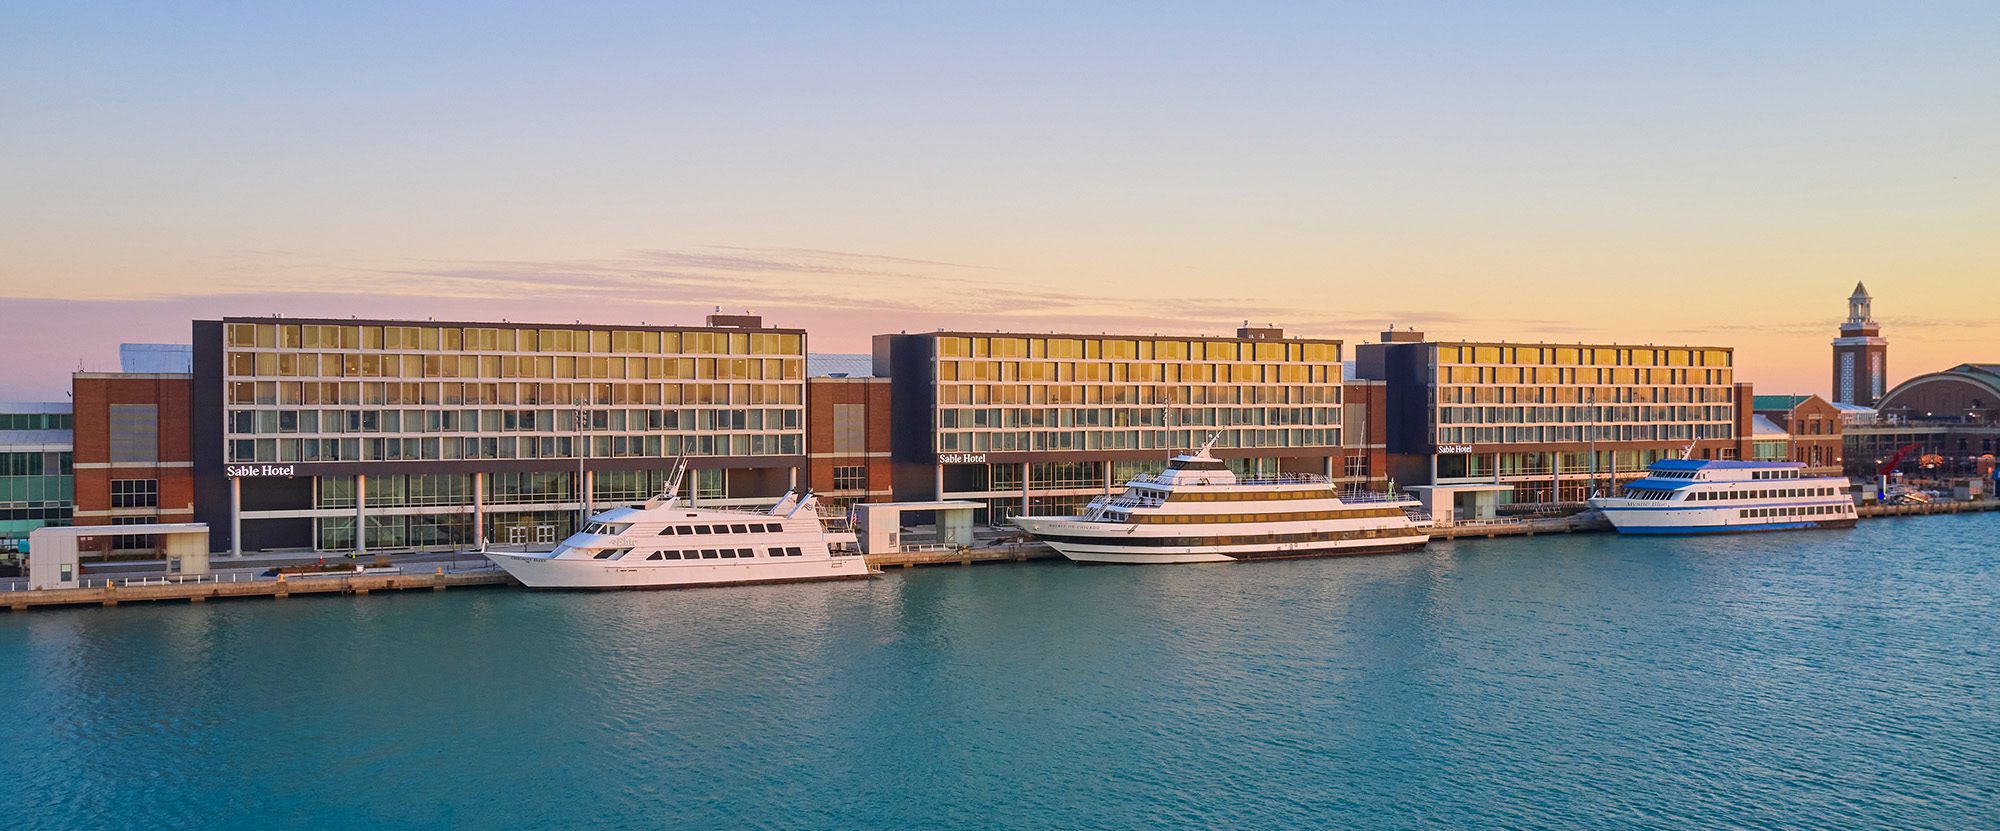 plan your visit sable at navy pier 2